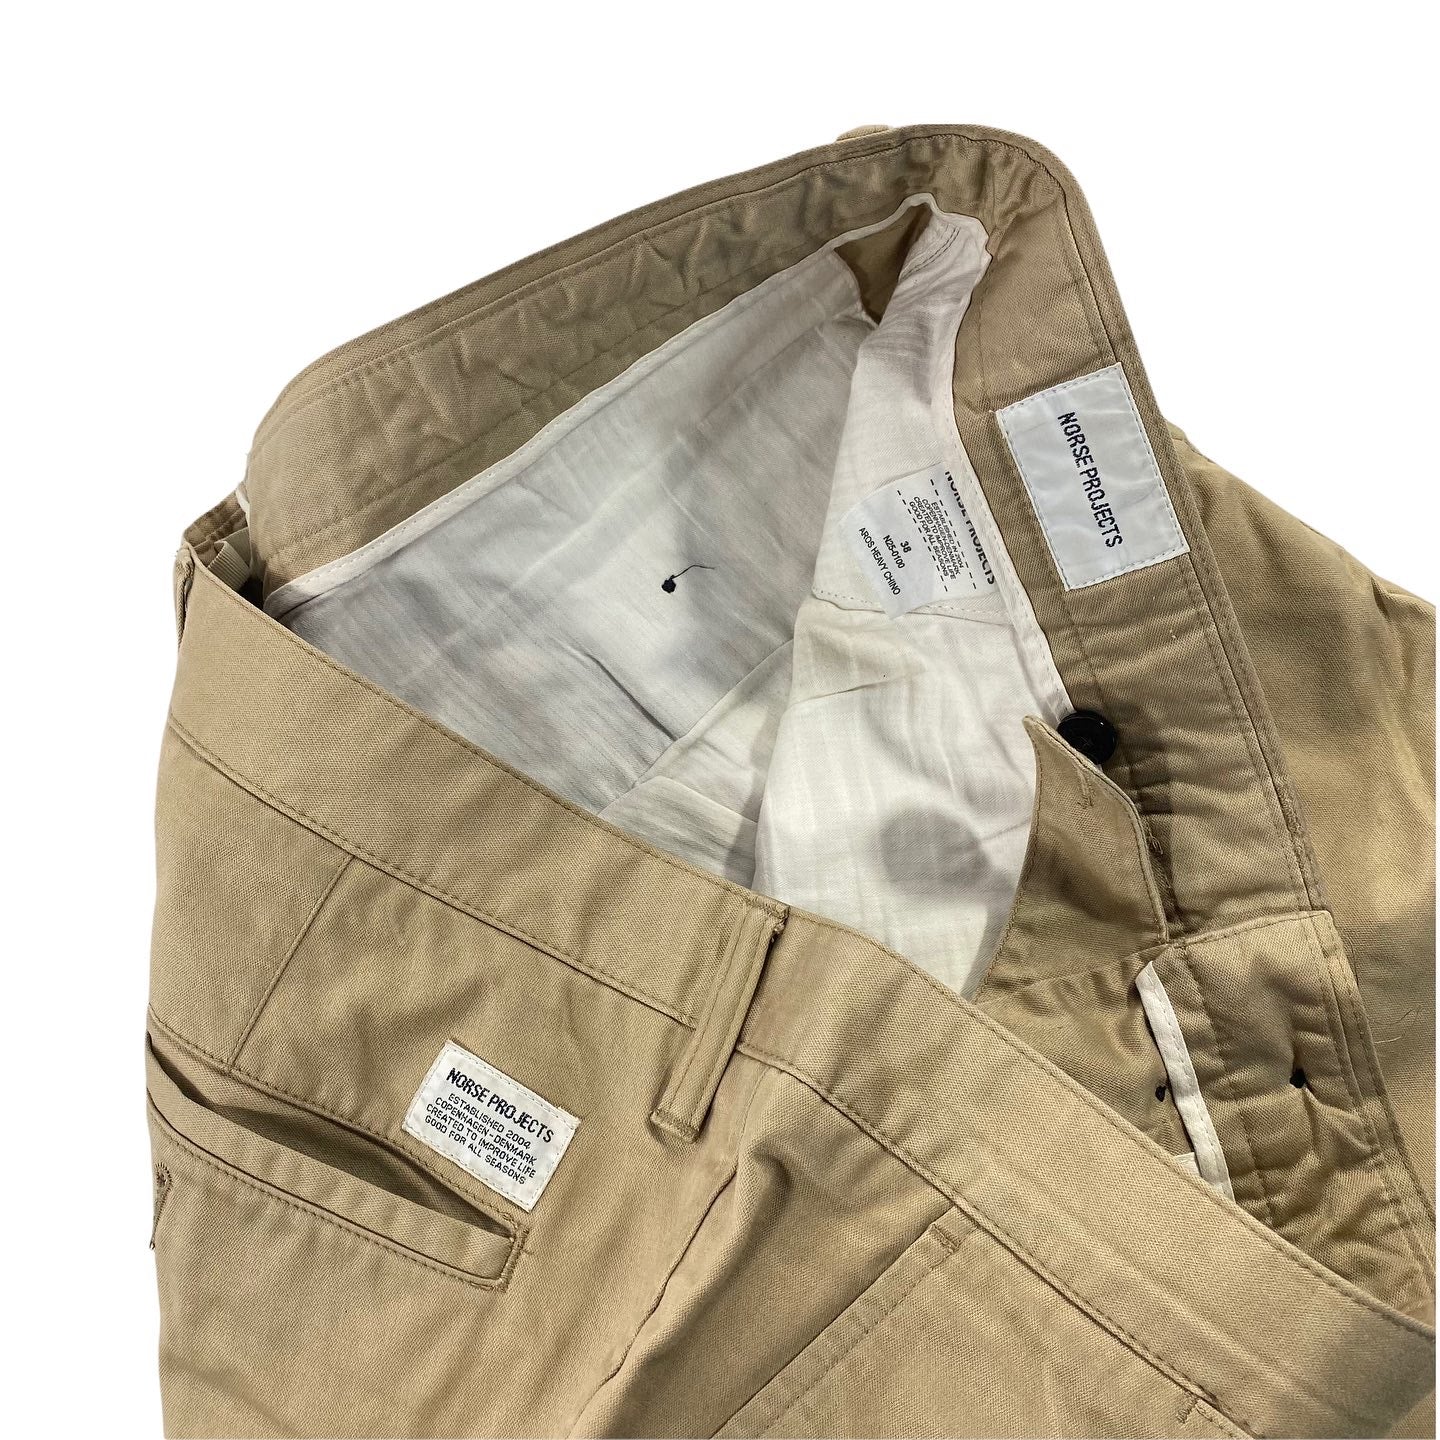 Norse projects khakis. 38/28